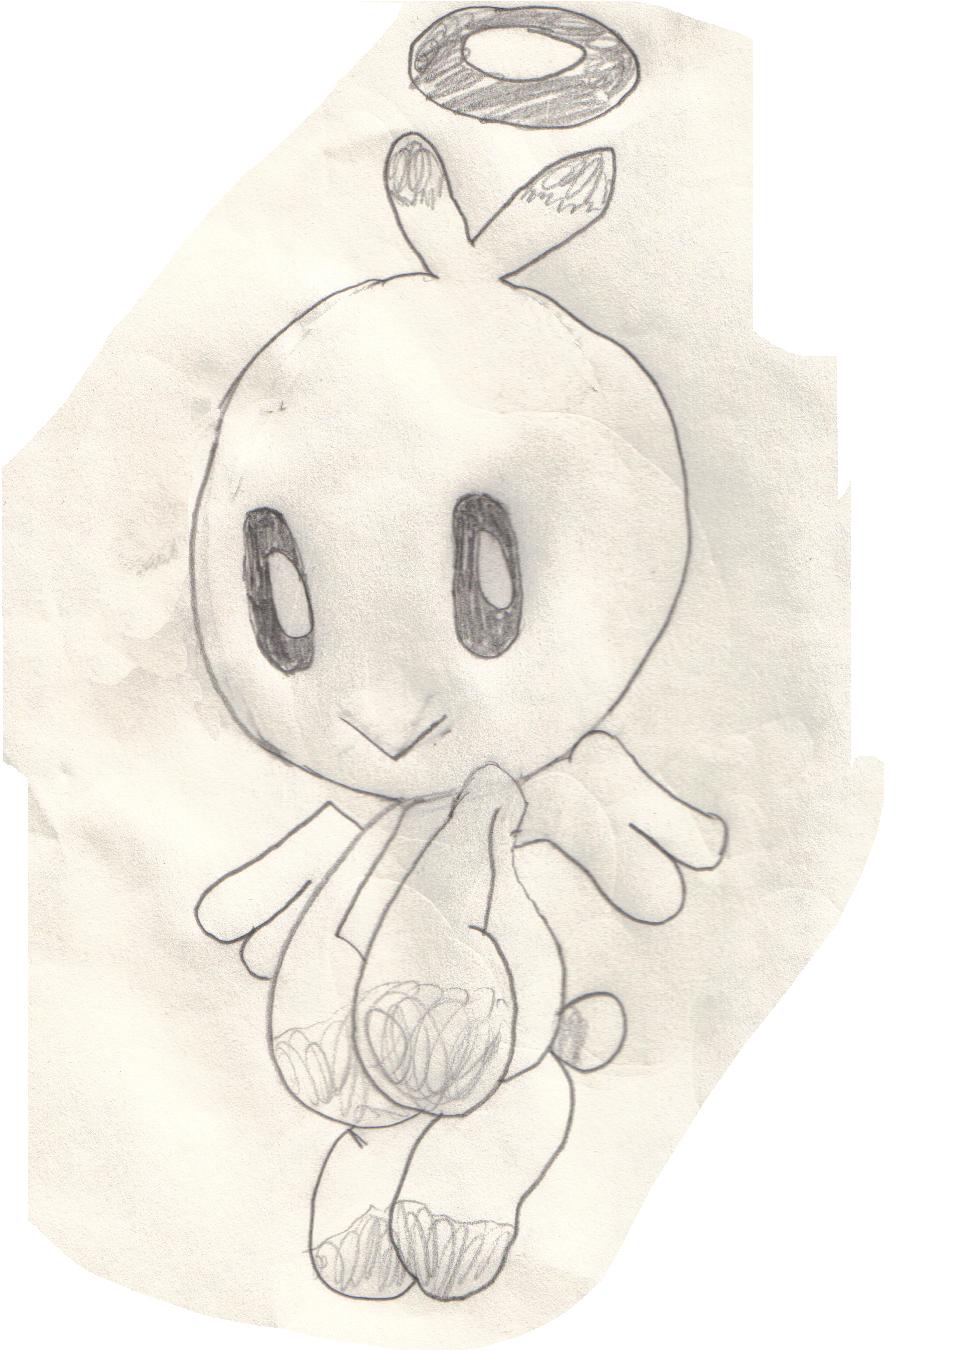 Hero Chao Non-Colored by md91